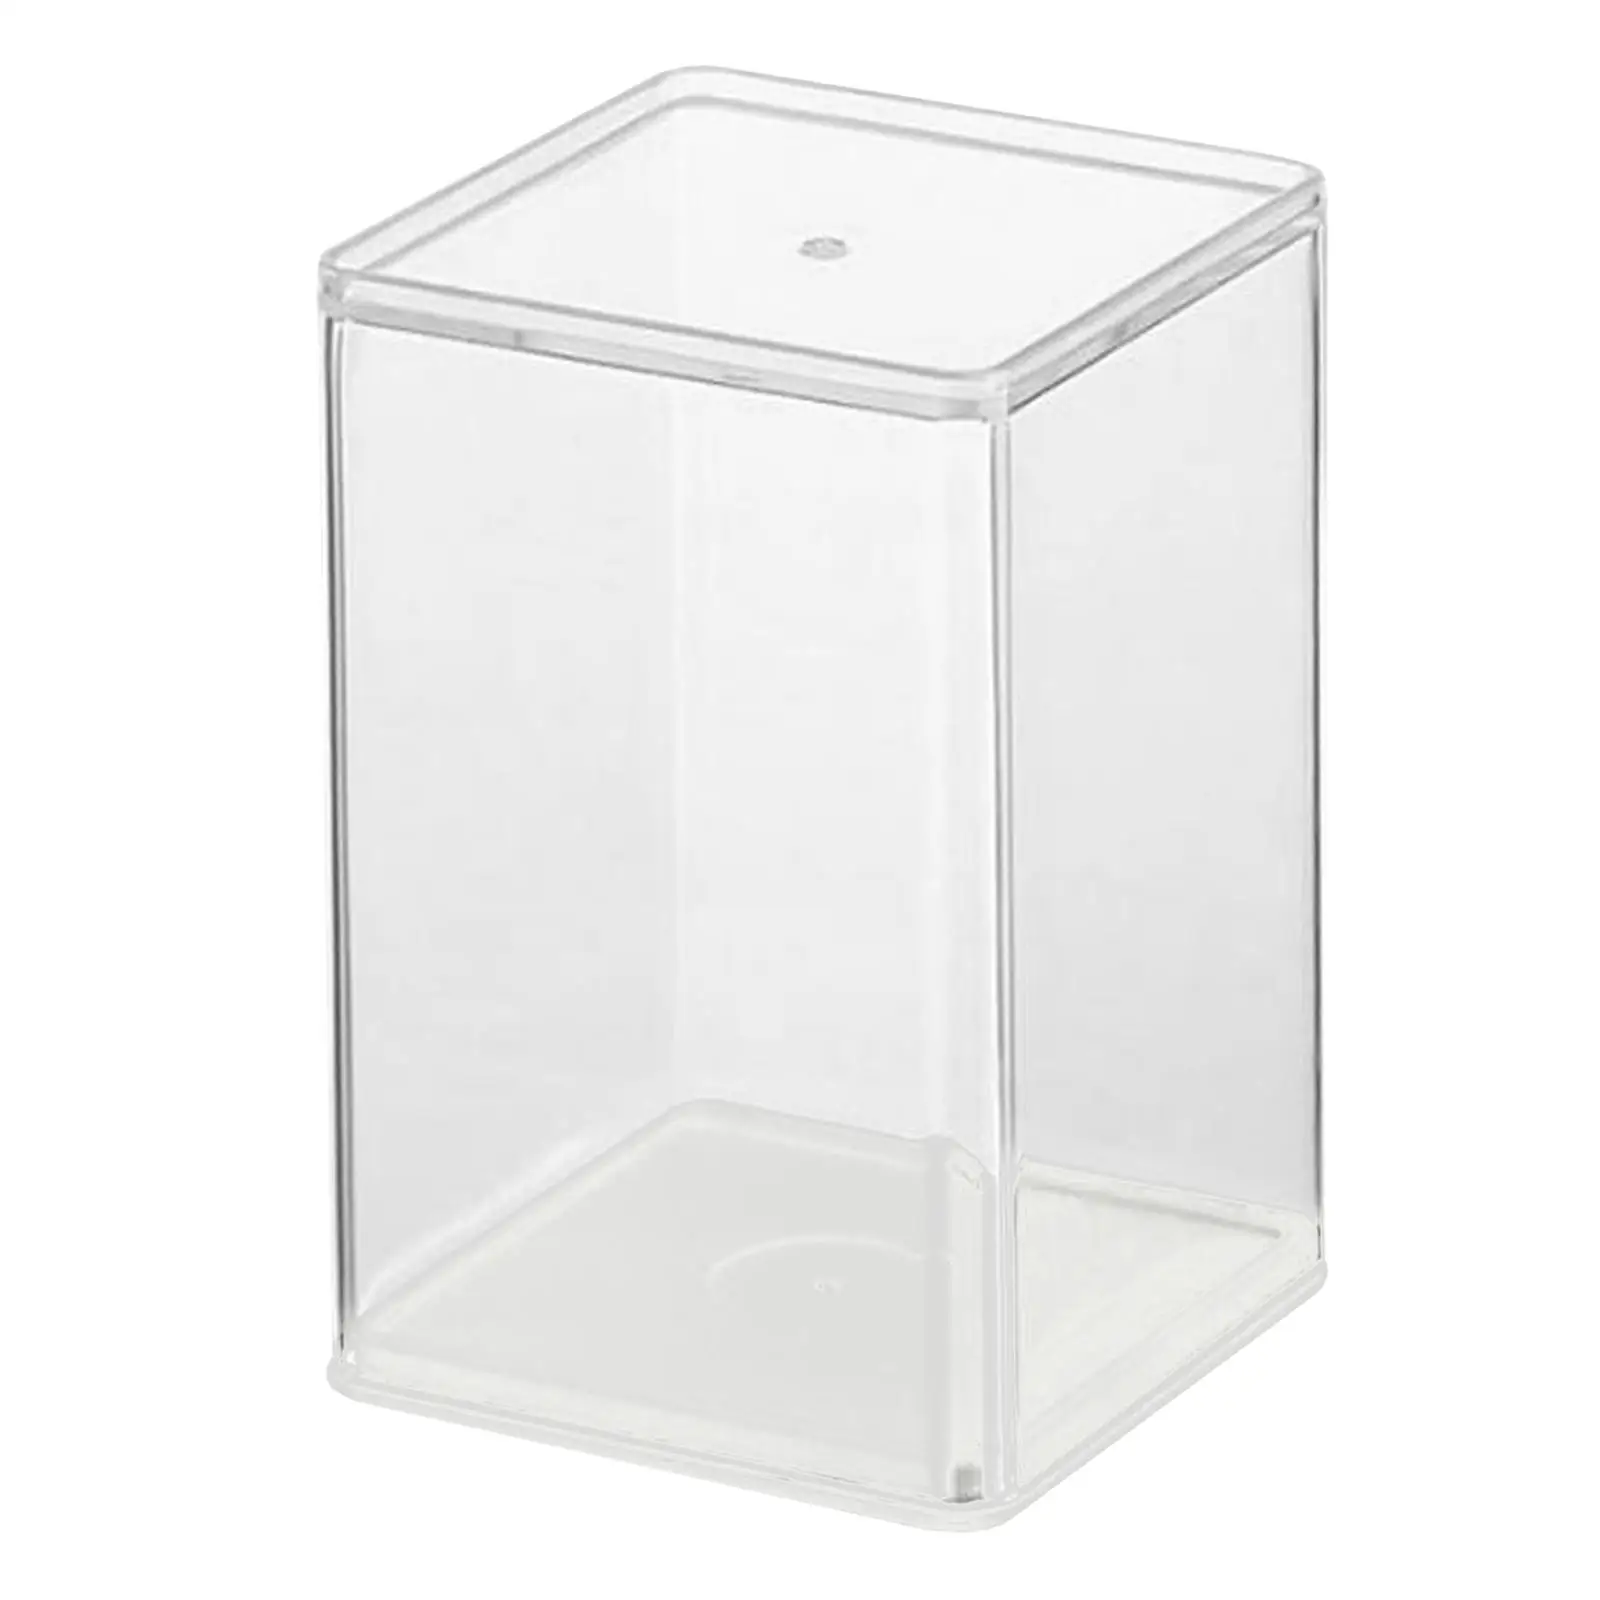 Acrylic Display Rack Case Dust Proof Stand Assemble Countertop Box Small Display Cabinet Storage Box for Model Dolls Toys Kids